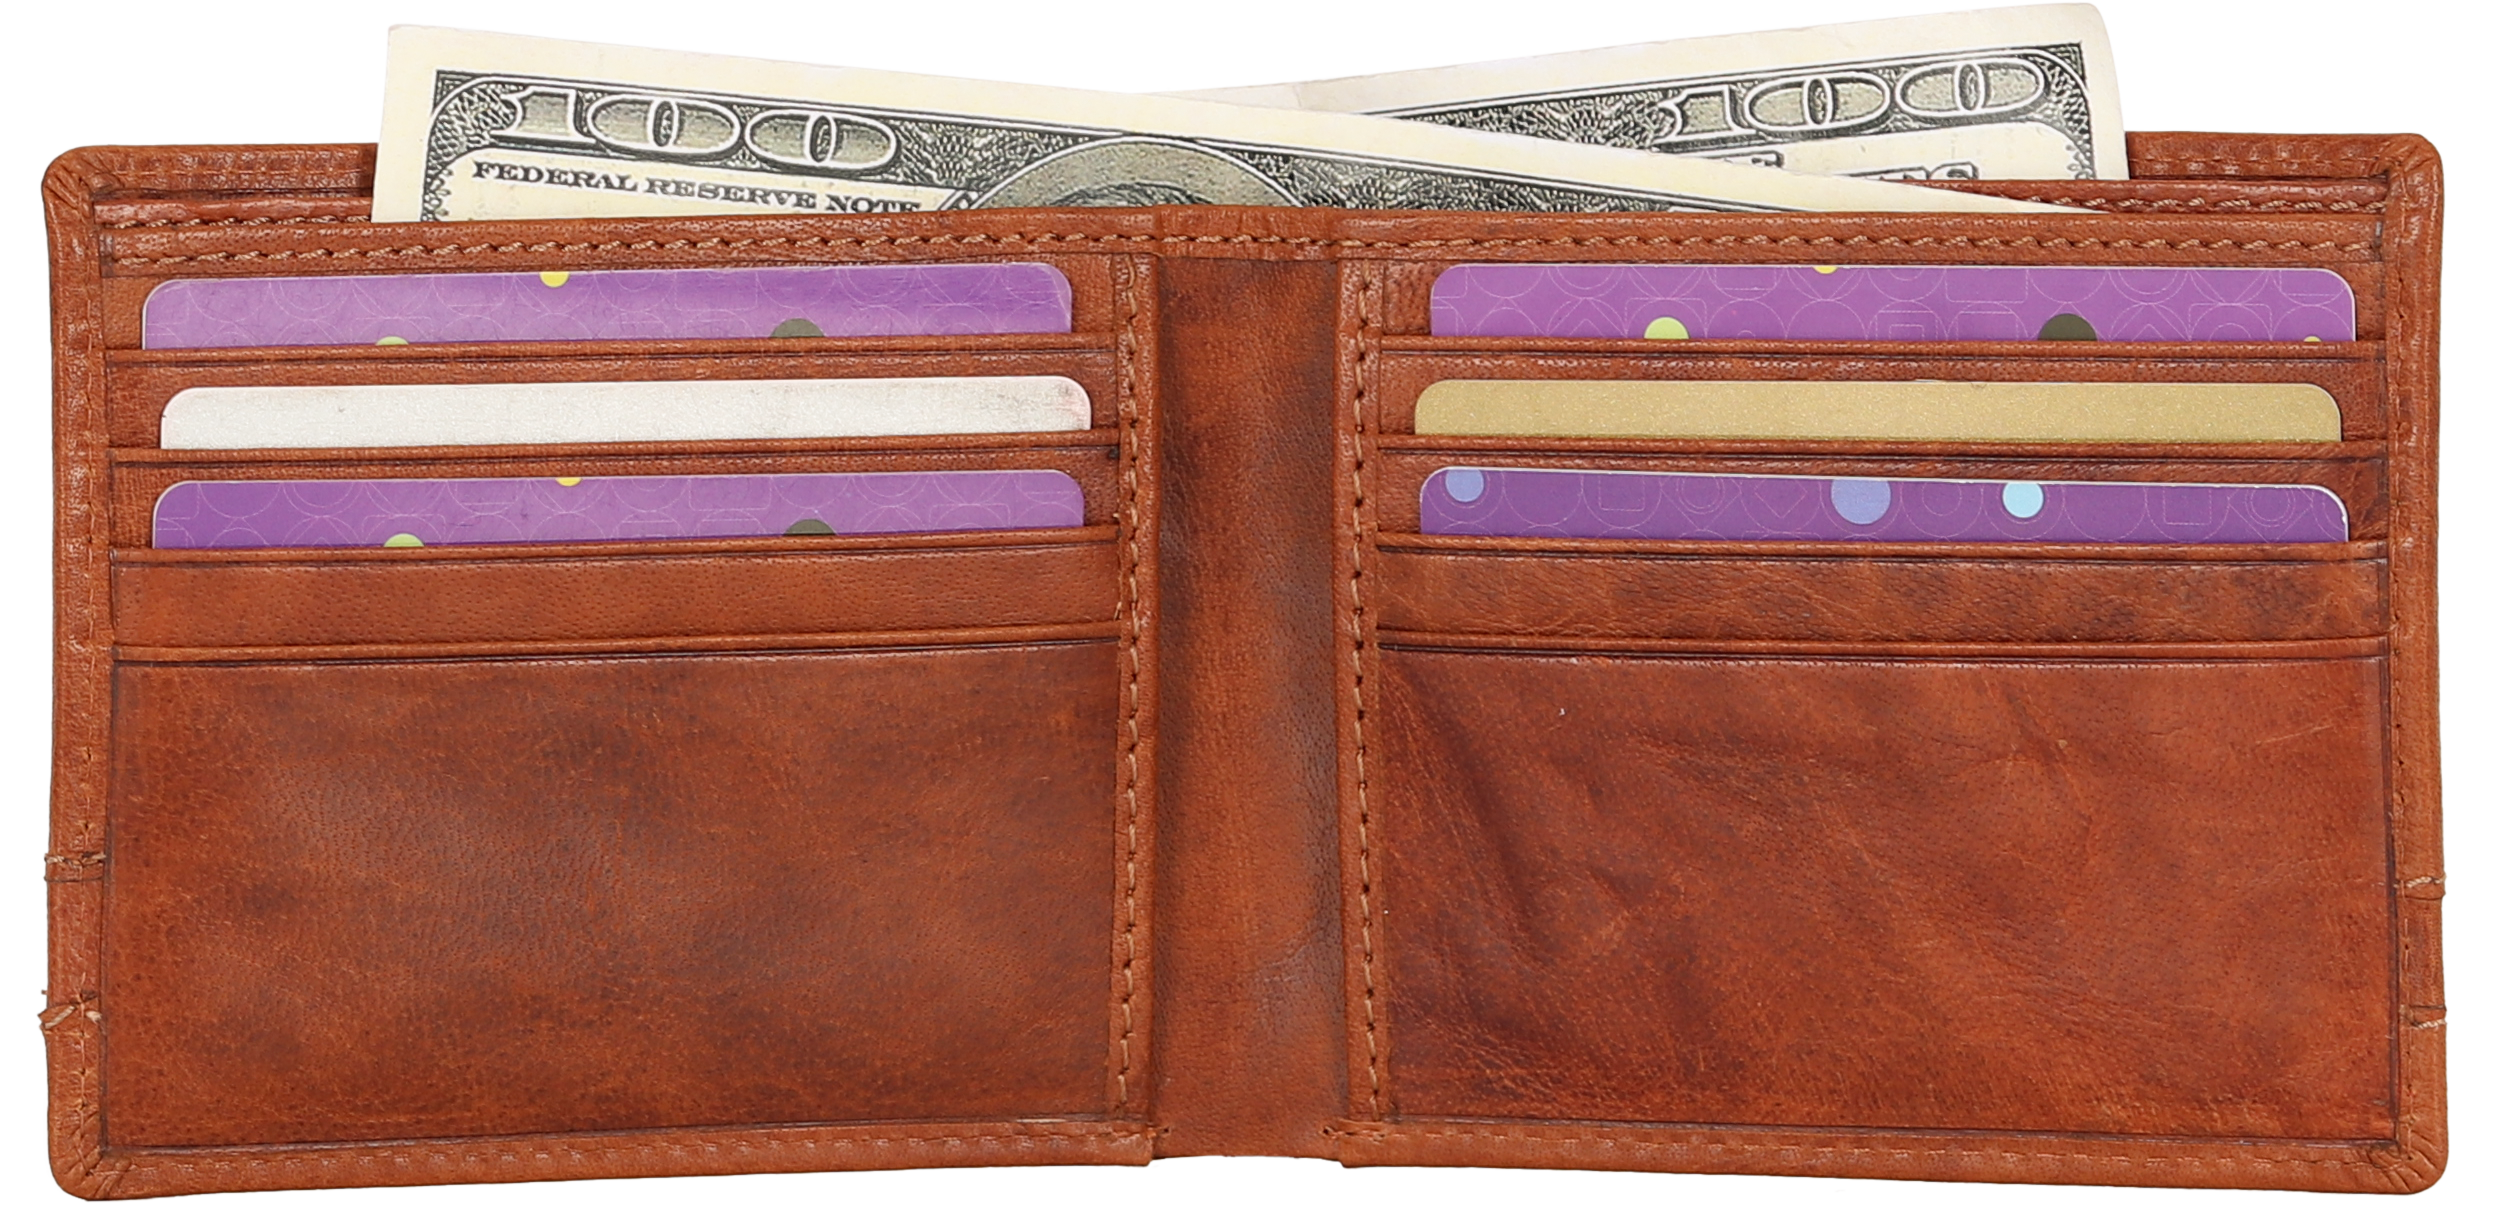 Rugged Earth Men's Bifold Plaid Wallet